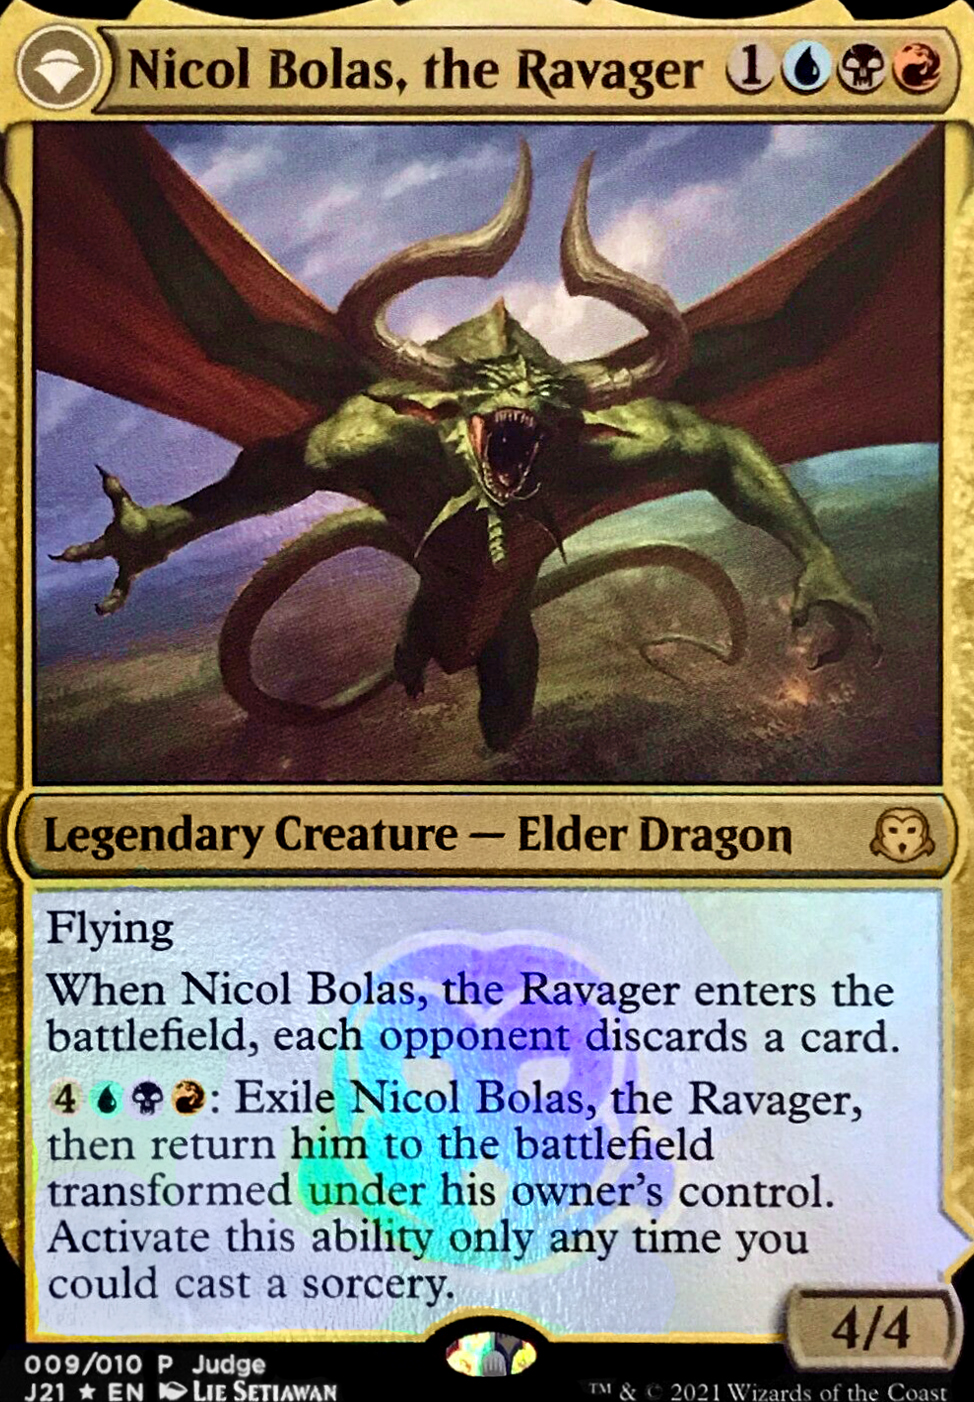 Featured card: Nicol Bolas, the Ravager